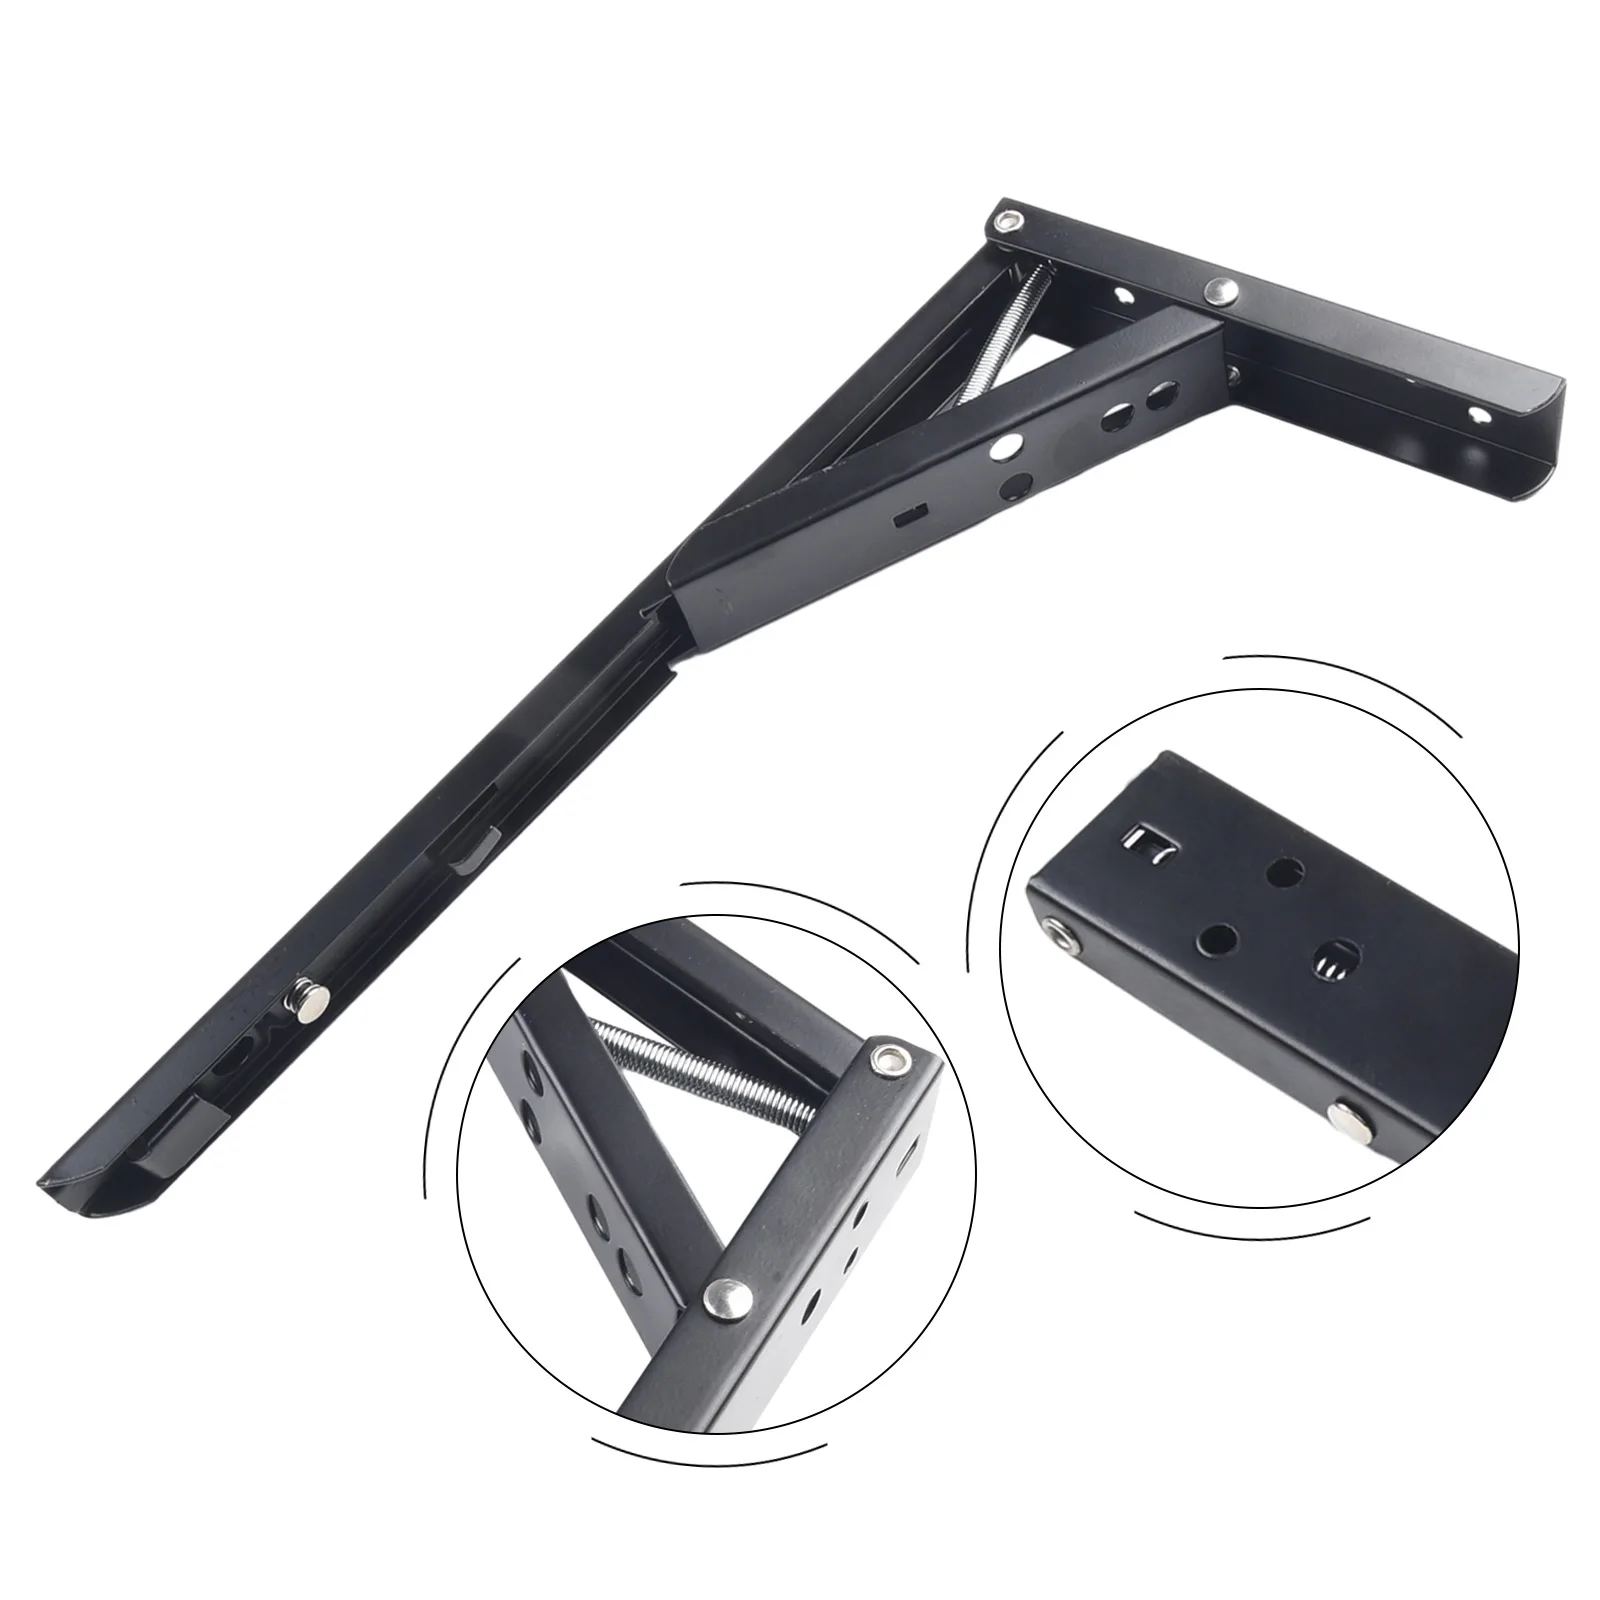 Folding Partition Bracket Etrack Accessories For Work Bench Collapsible Heavy Duty Shelf Hinge Stainless Steel